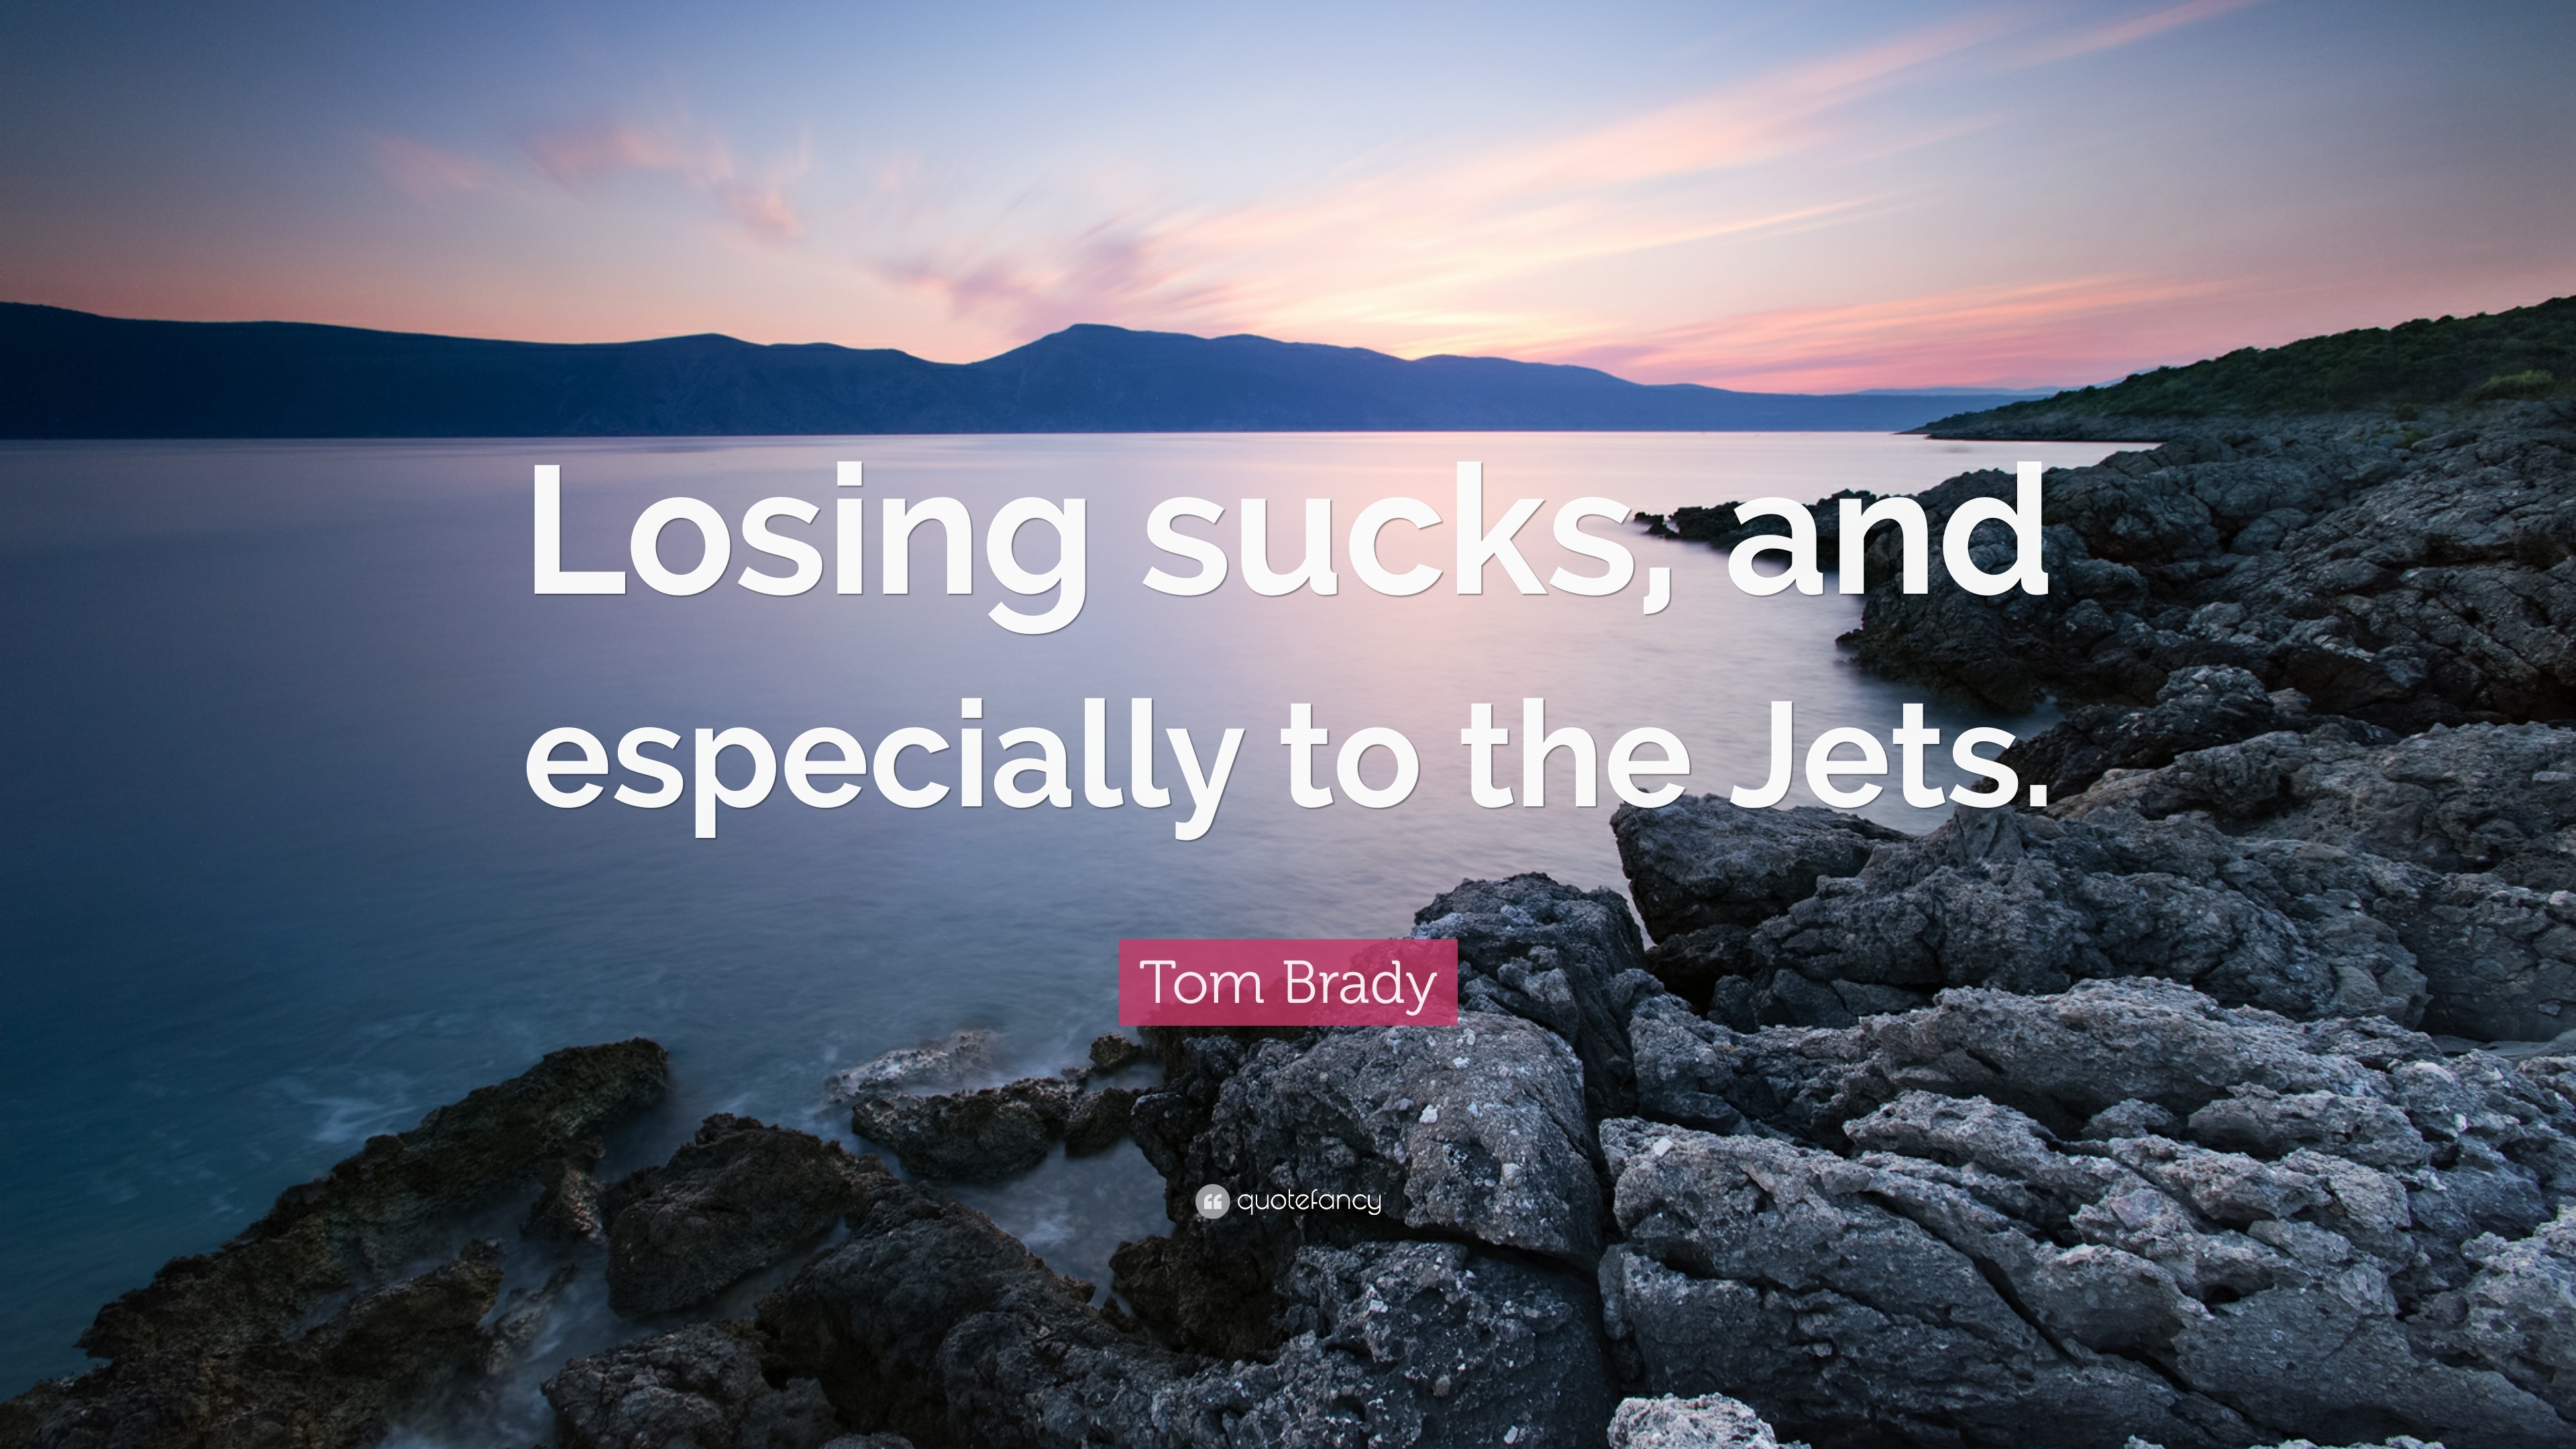 3840x2160 Tom Brady Quote: “Losing sucks, and especially to the Jets.”